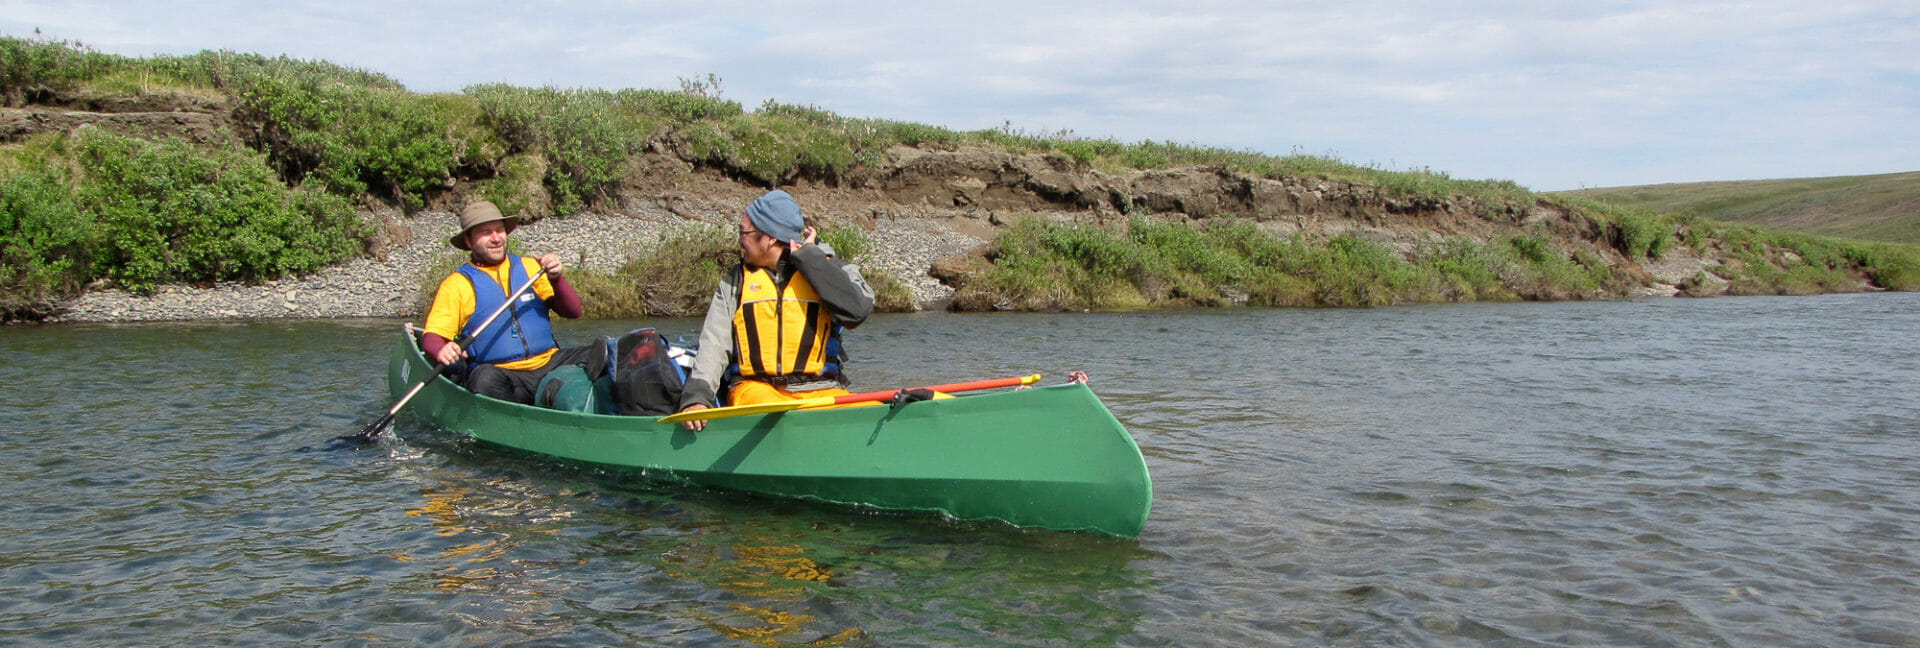 2 paddlers discuss the river while steering a canoe in the arctic